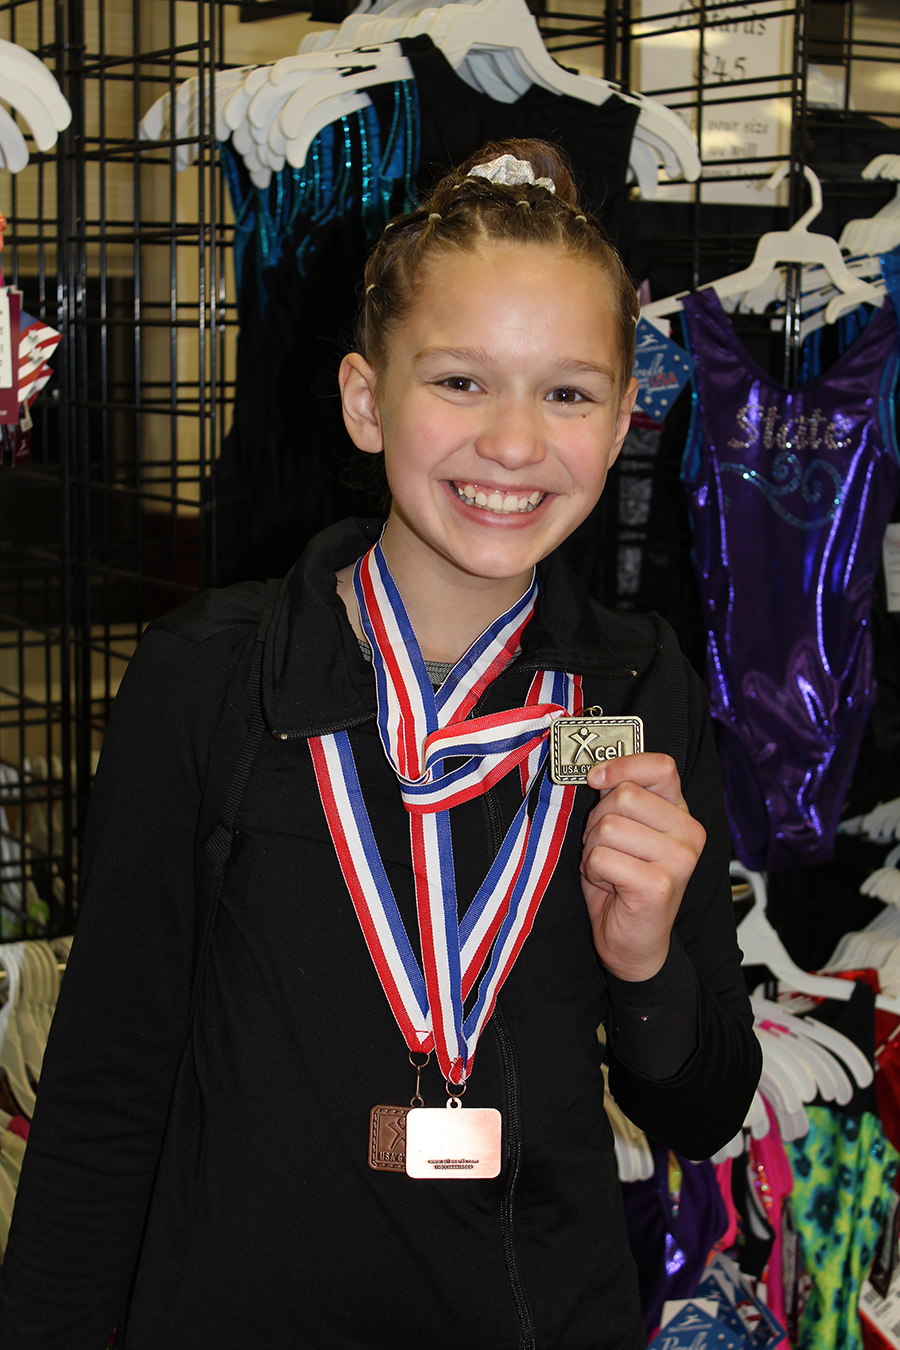 Ann Competes at  WV State Women’s Gymnastics Championship